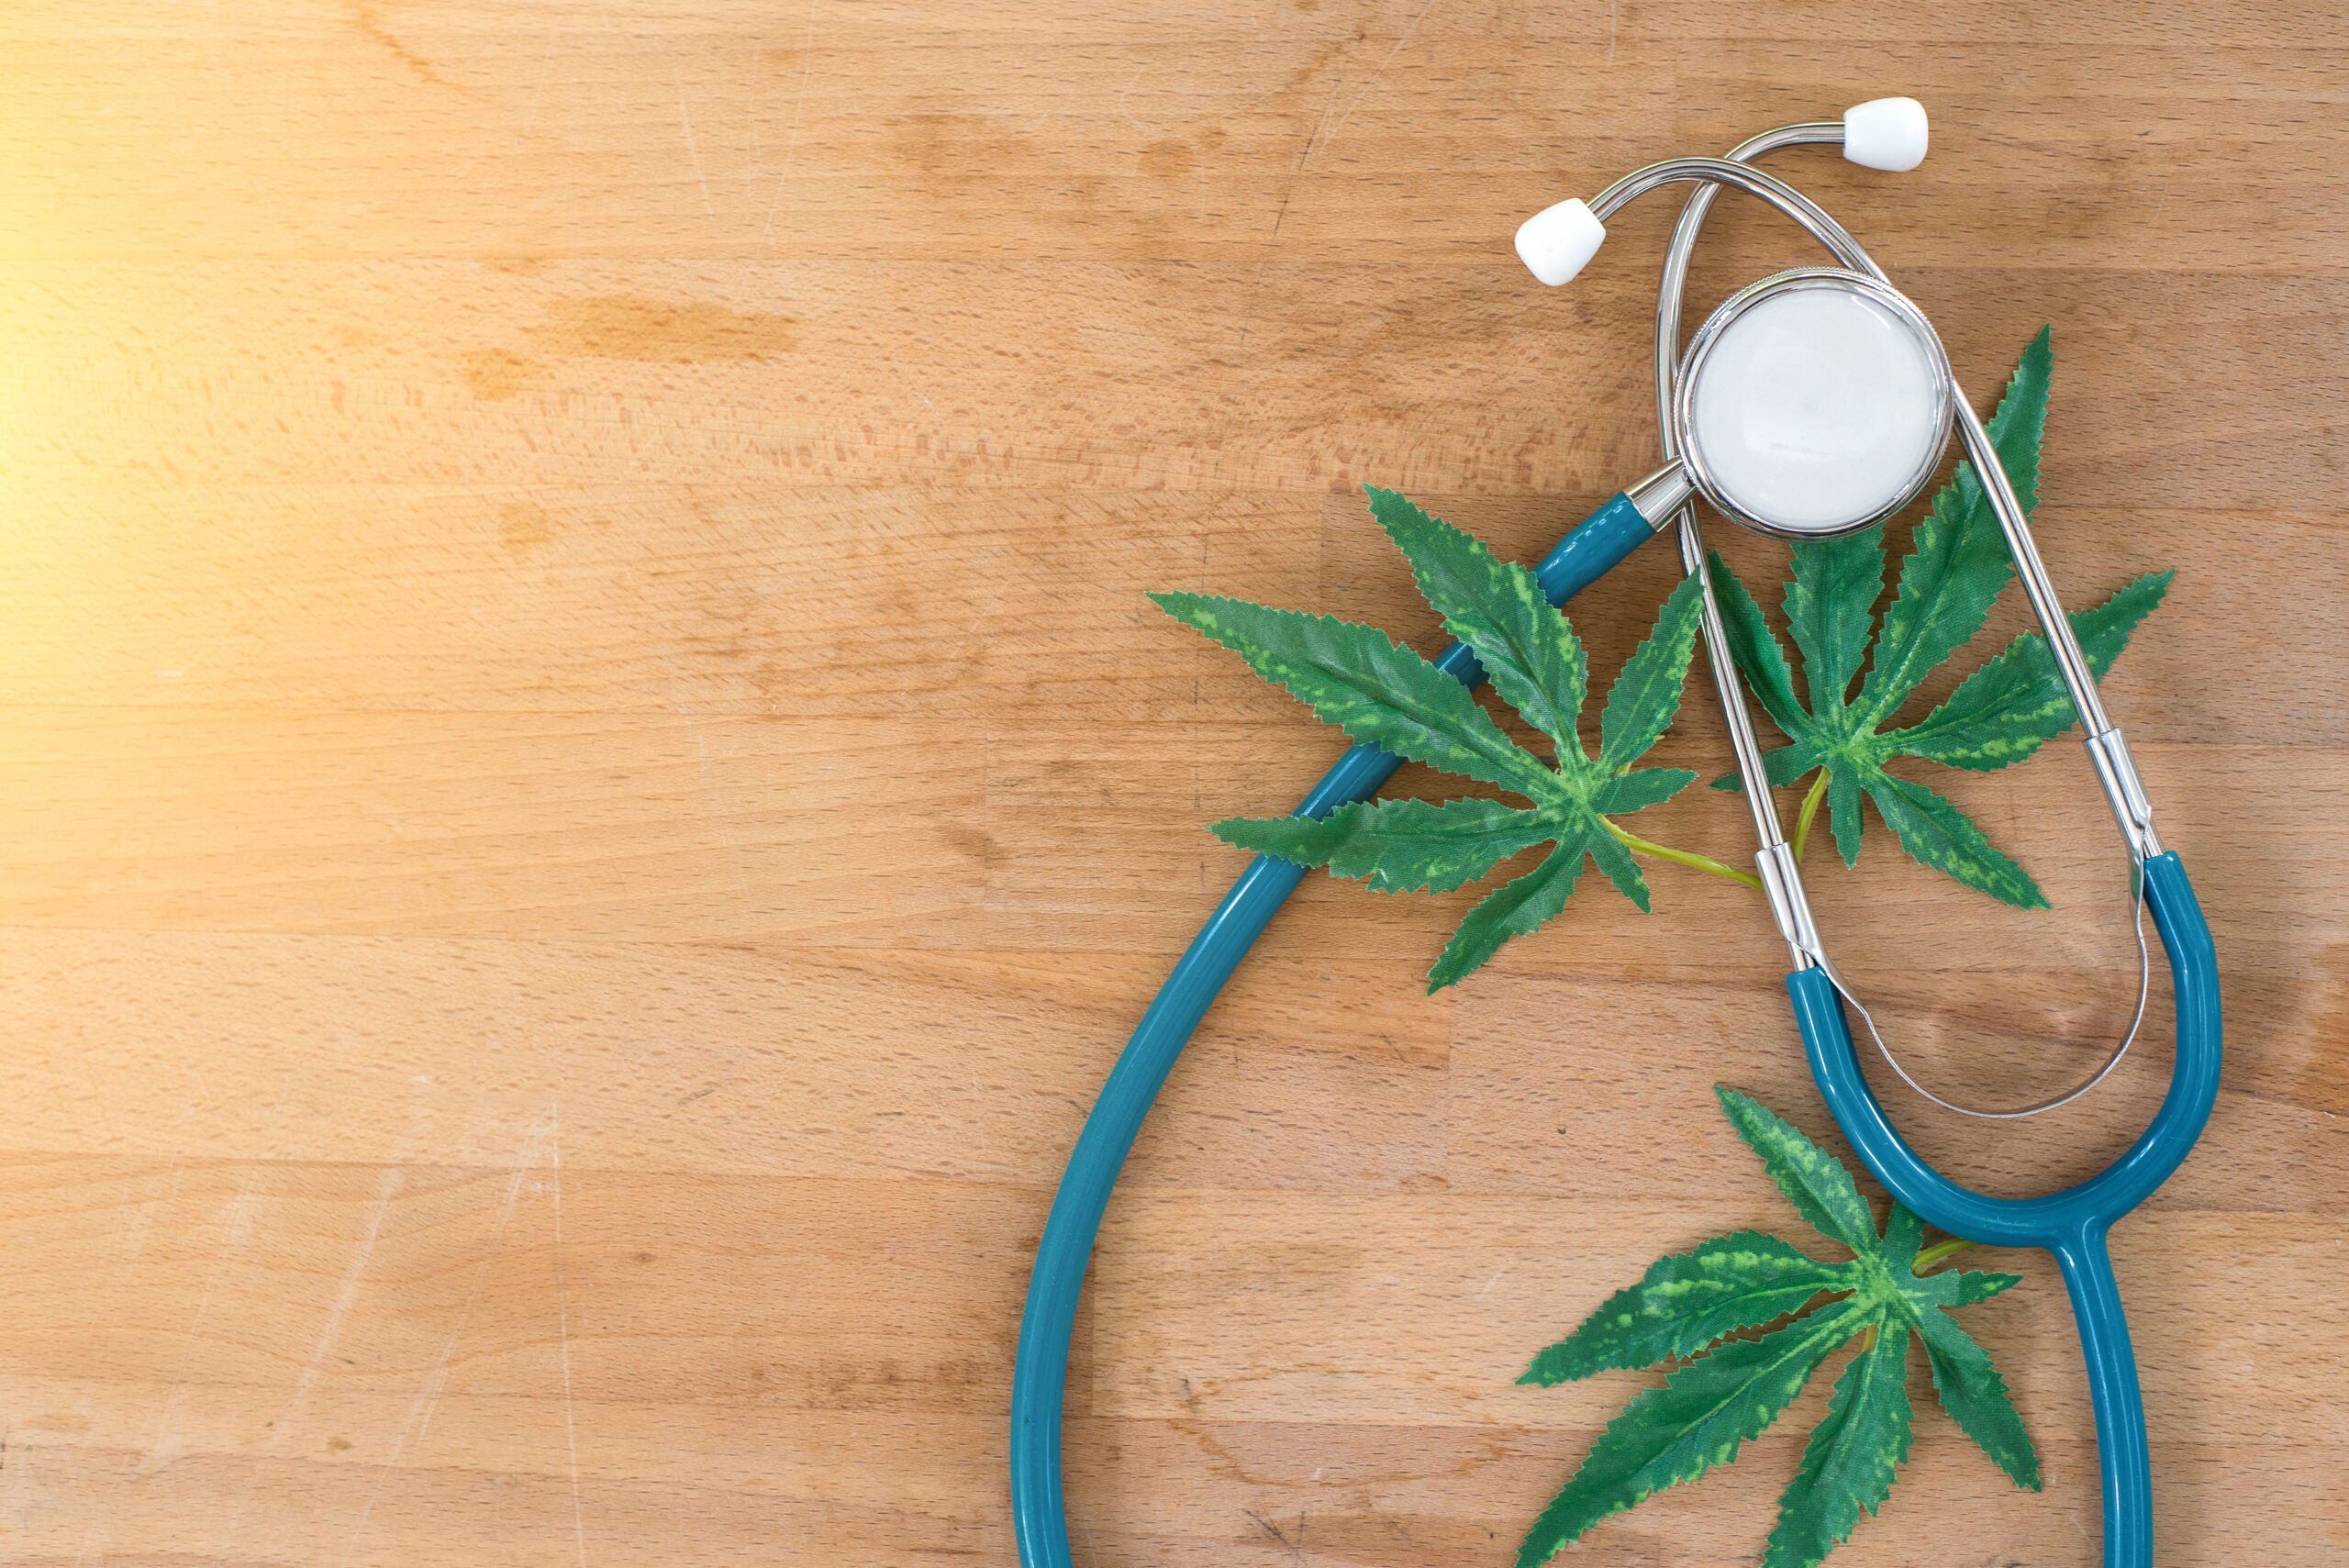 MedReleaf’s genetic test will help physicians prescribe cannabis with greater confidence